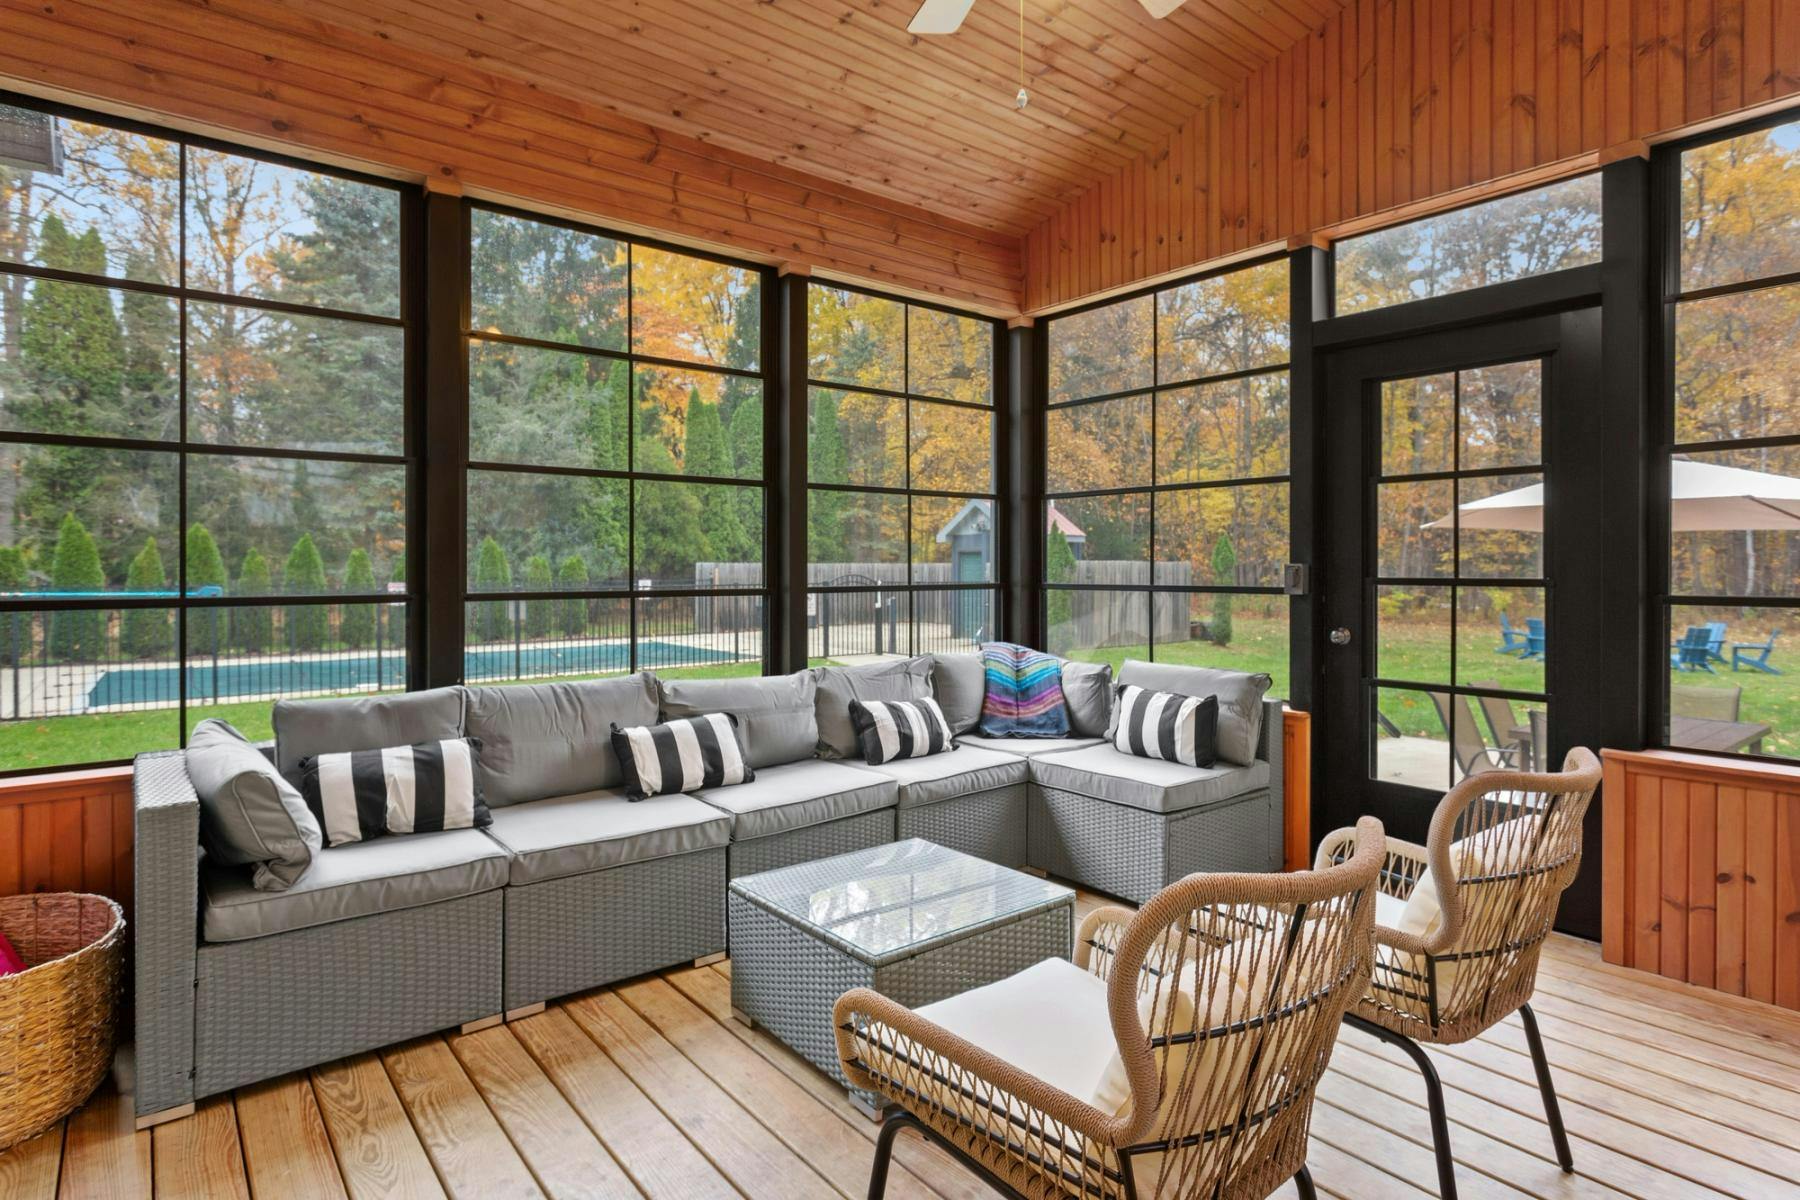 Plenty of outdoor living space at this Southwest Michigan vacation rental